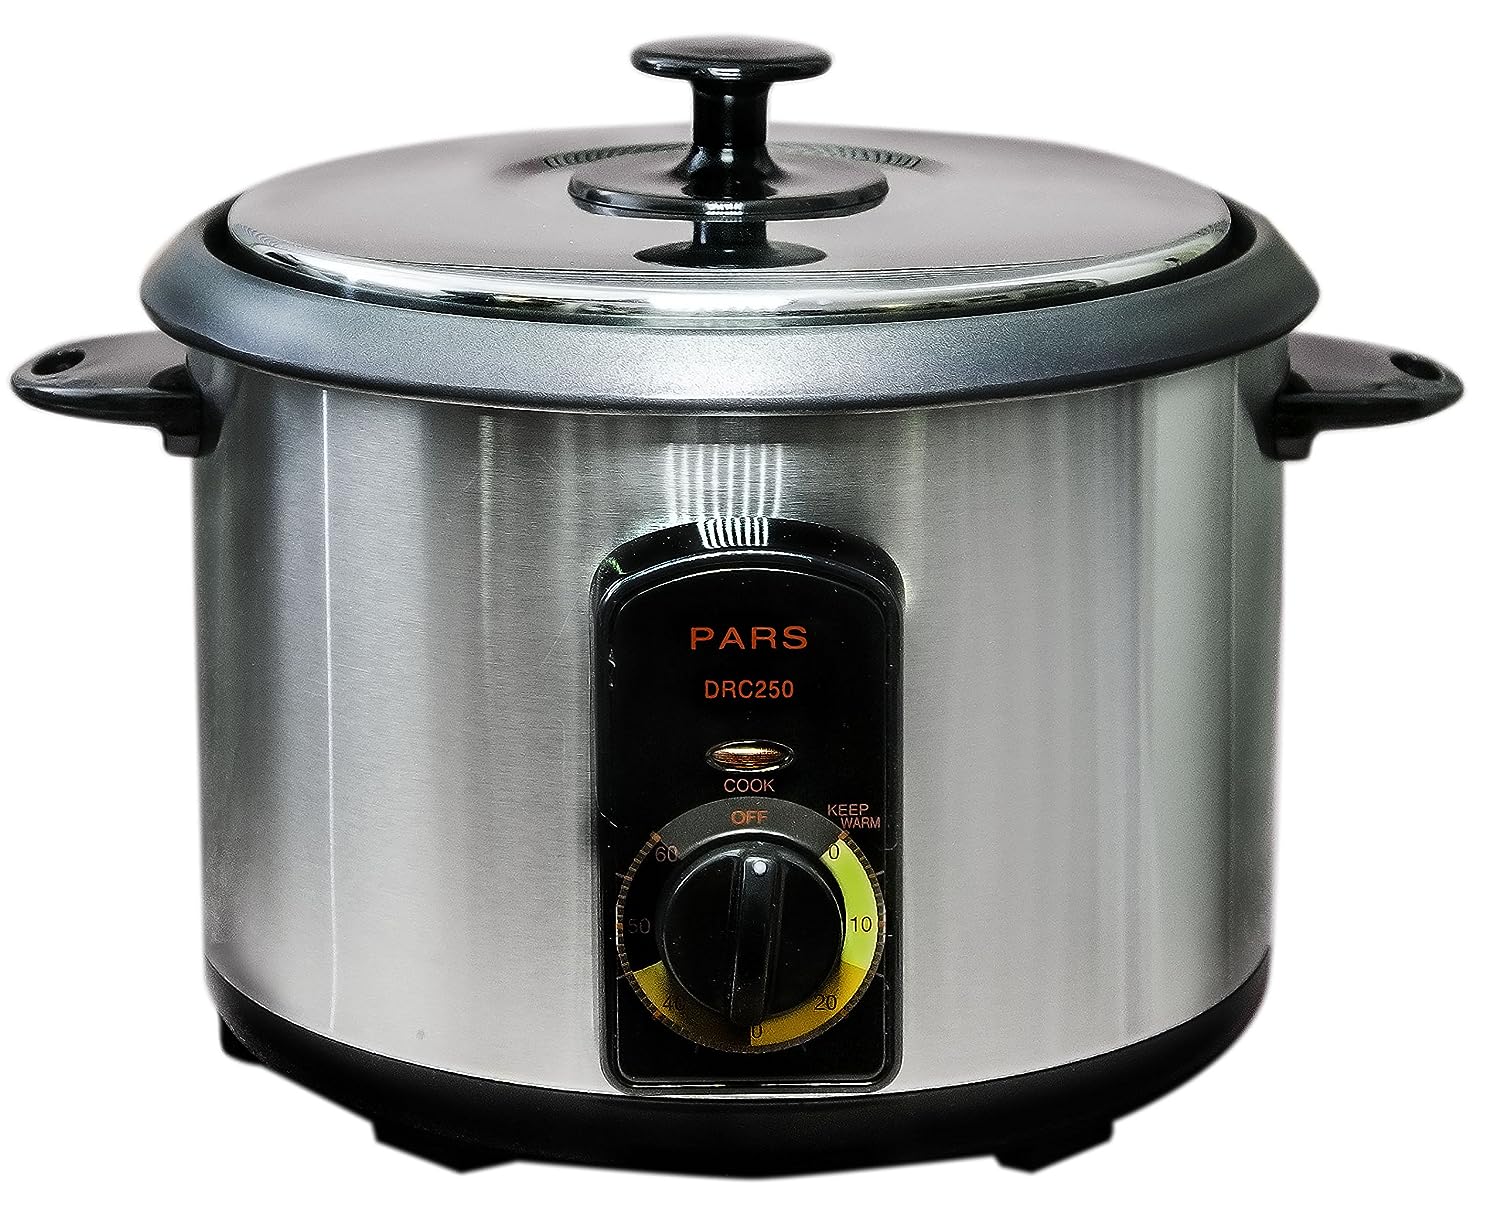 https://storables.com/wp-content/uploads/2023/08/8-incredible-pars-persian-rice-cooker-for-2023-1692076096.jpg